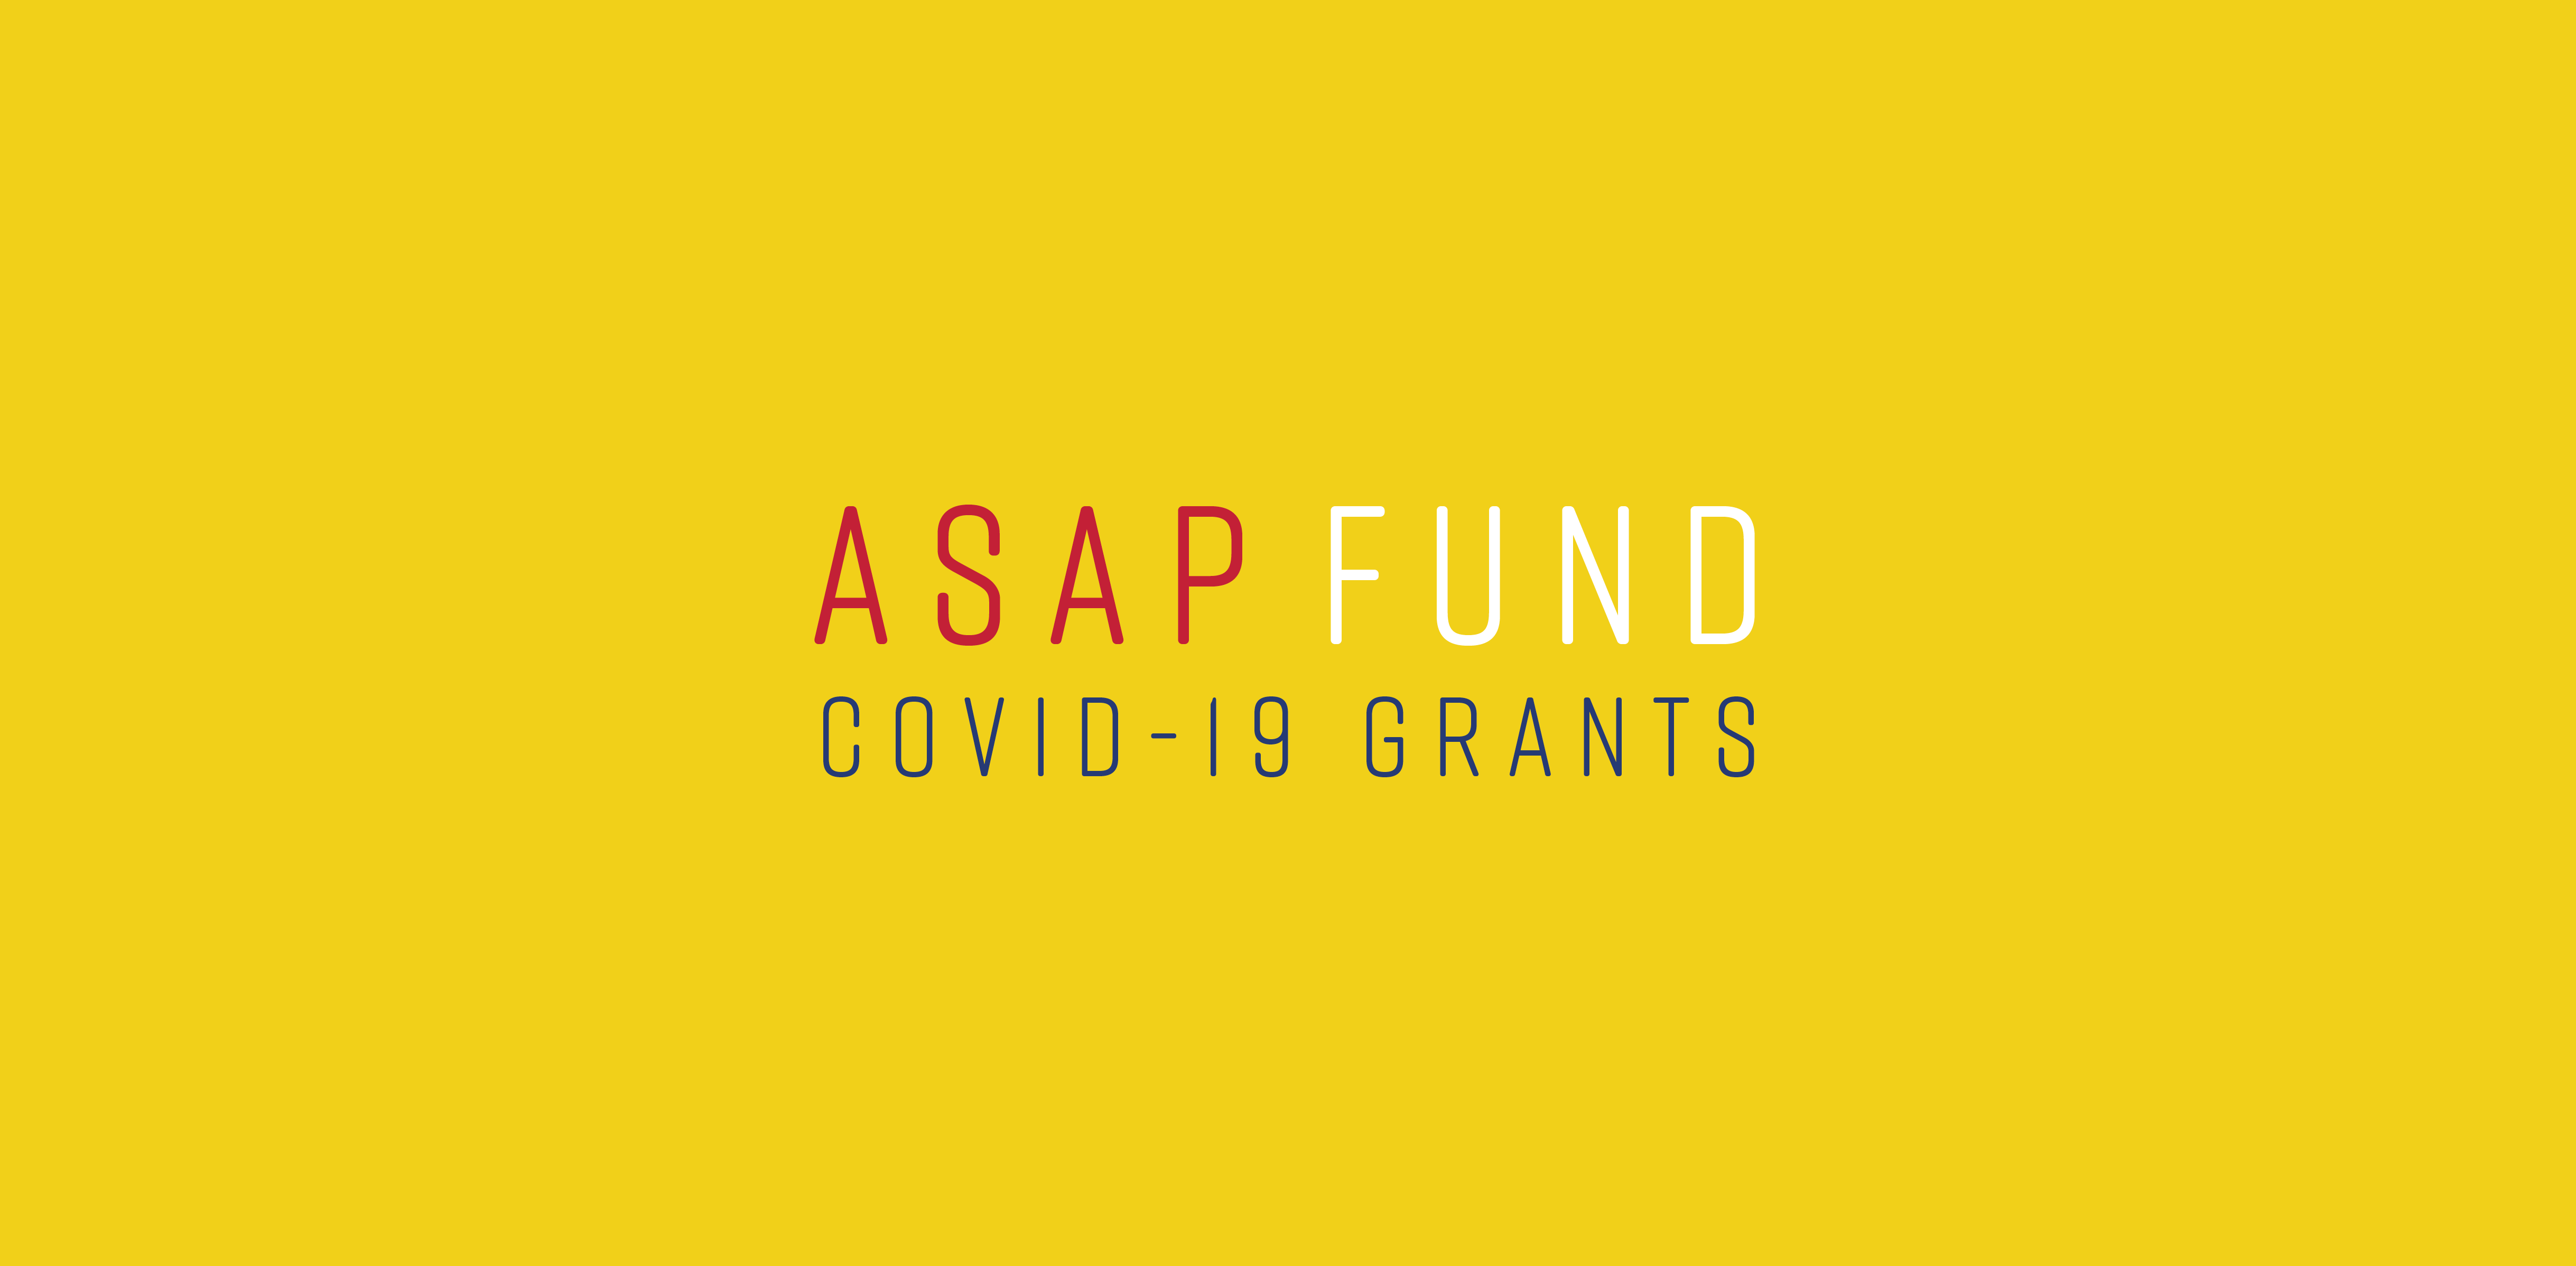 "ASAP Fund / Covid-19 Grants" is typed against a bright yellow background.